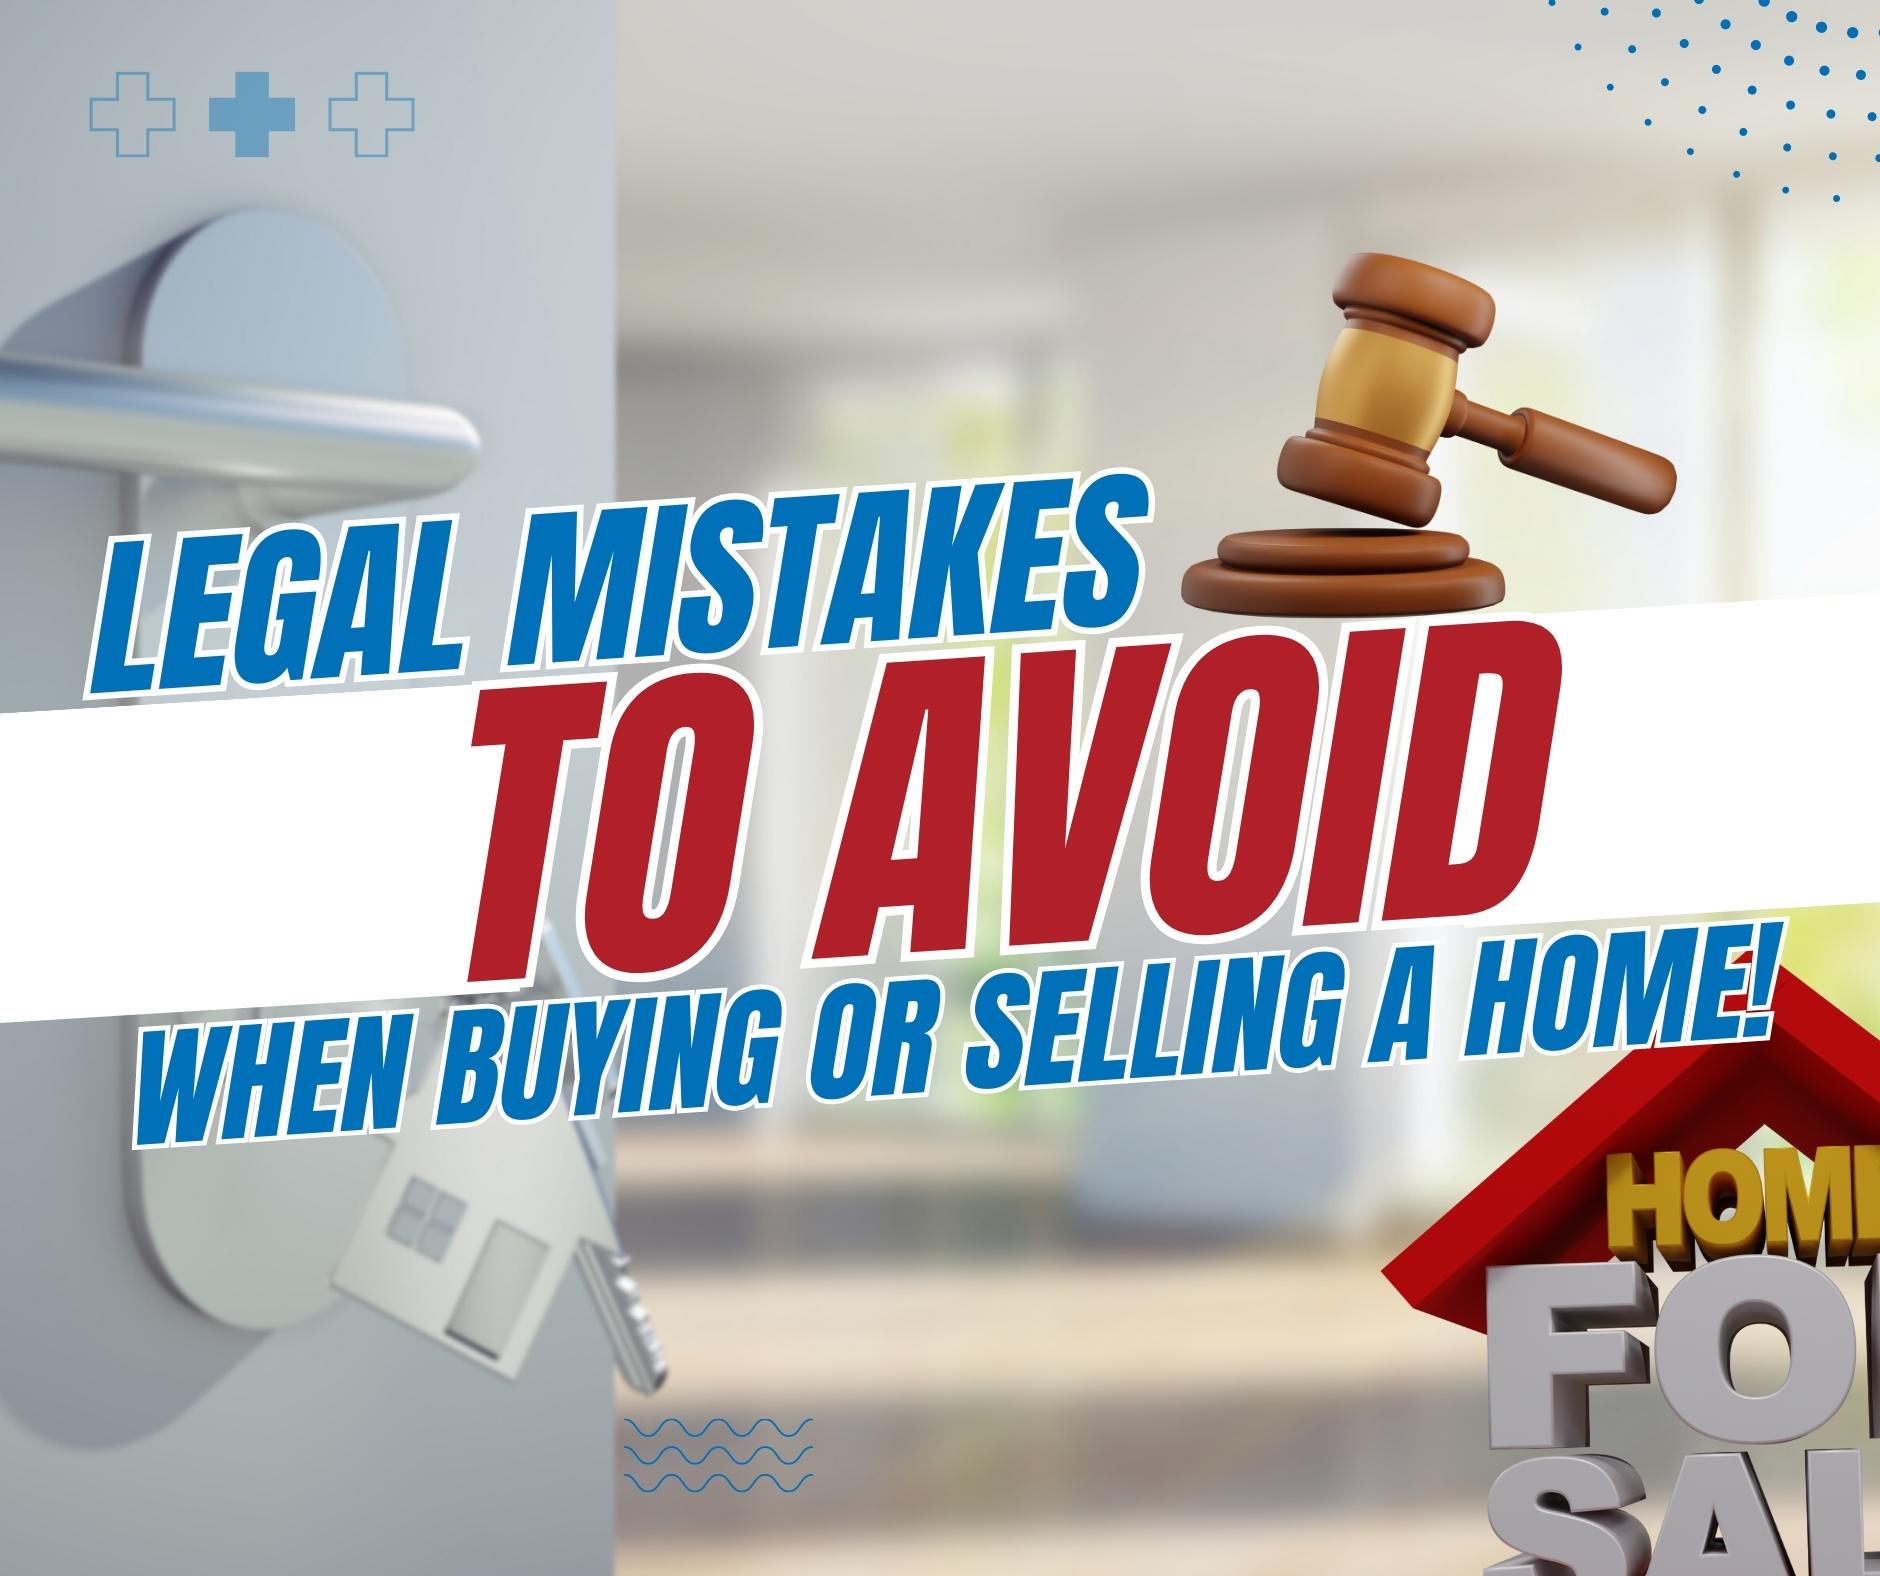 Legal Mistakes To Avoid When Buying Or Selling A Home